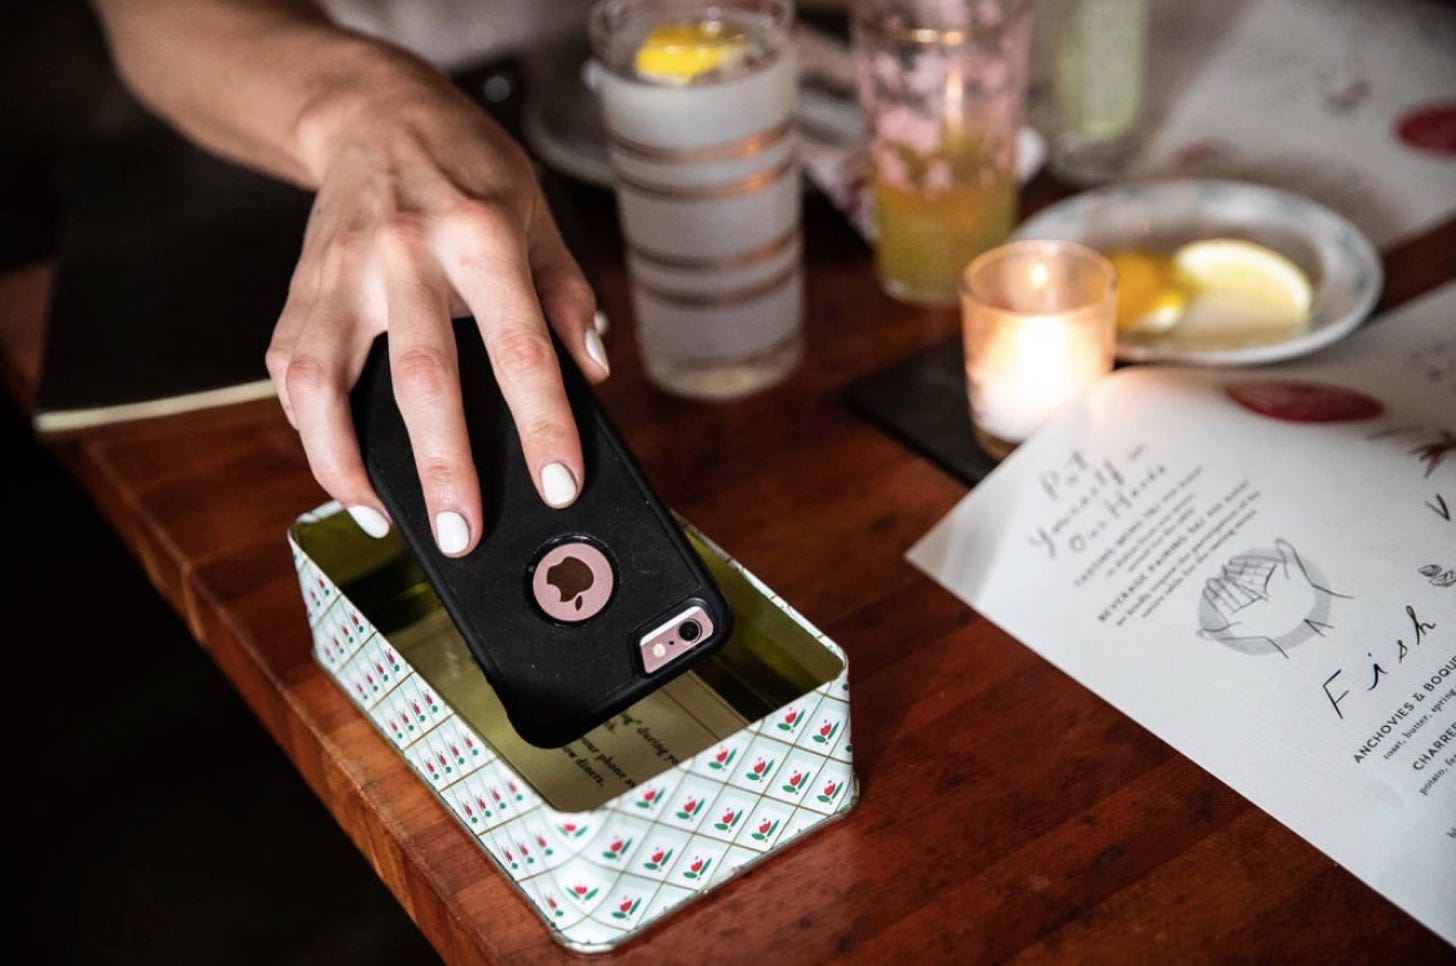 A woman's hand places a phone face-down into a tin antique box on a restaurant table.